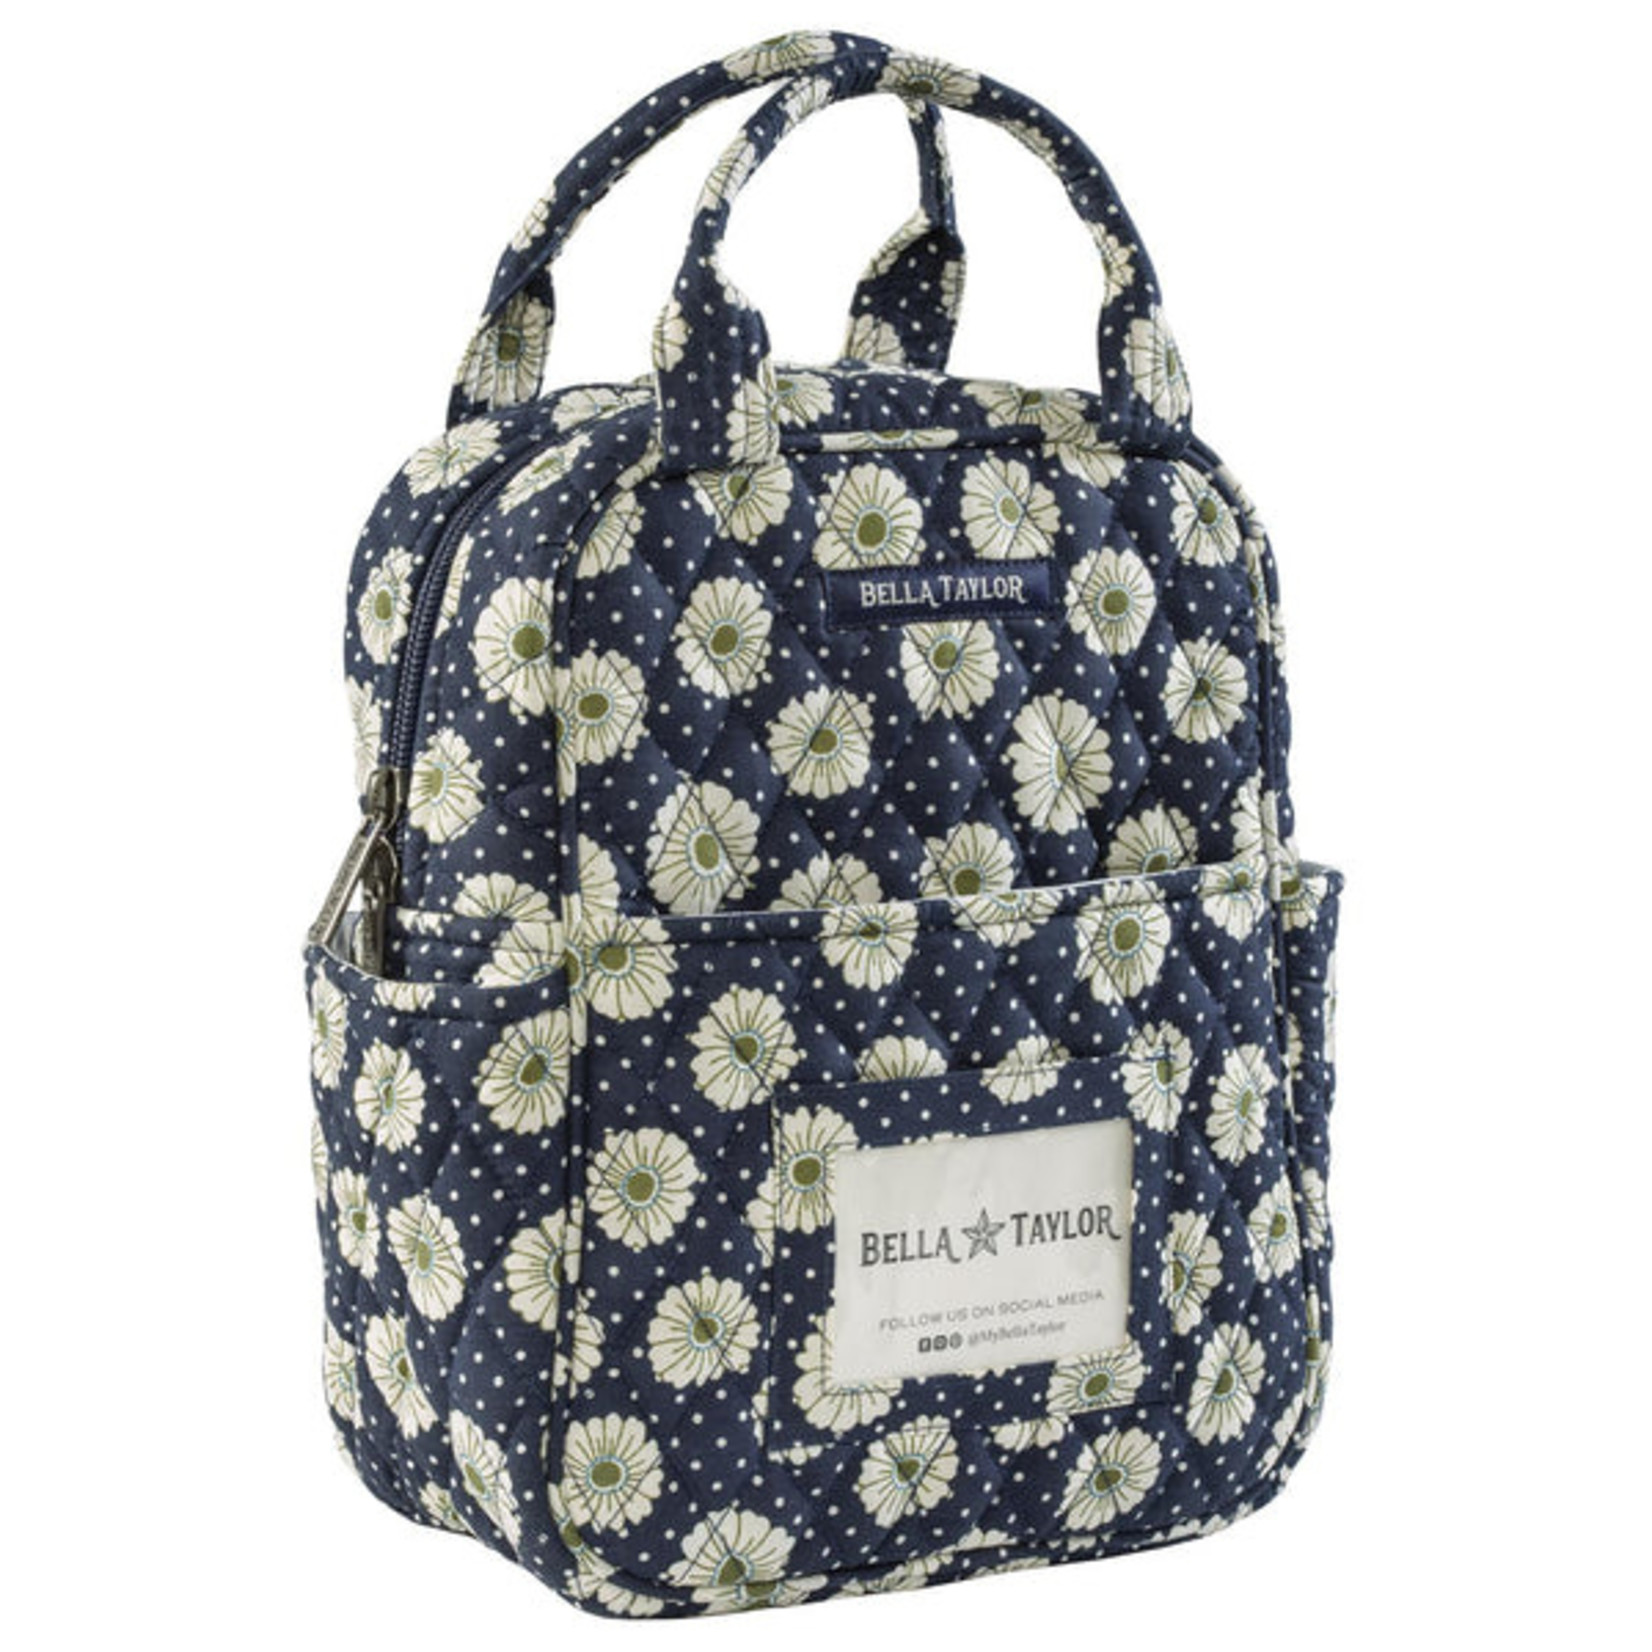 Bella Taylor Dotted Daisy Navy - Lunch Tote